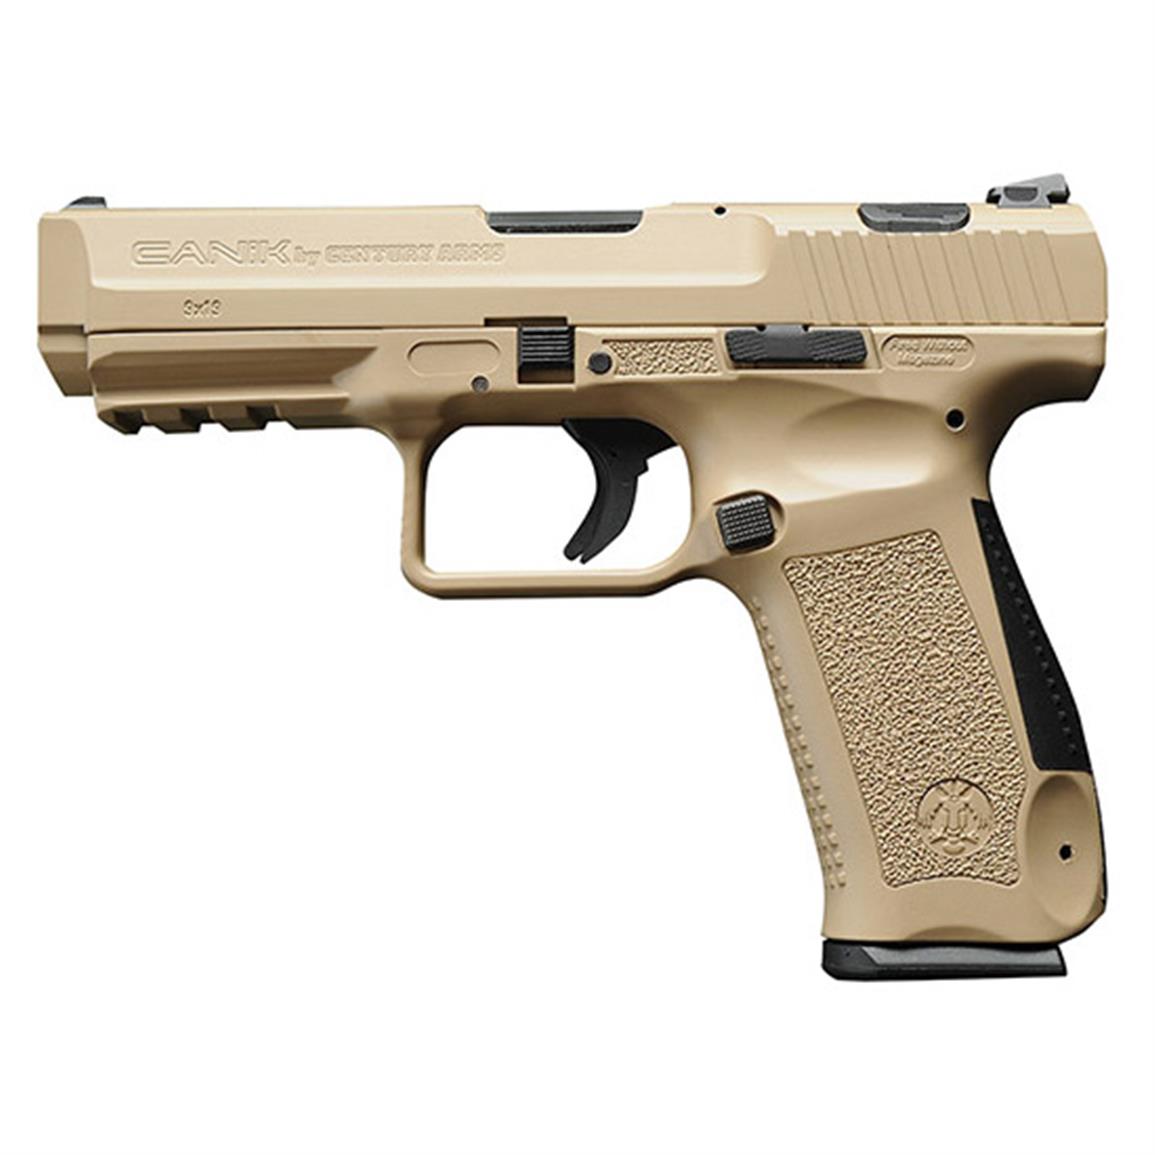 Century Arms TP9SA Canik, Semi-Automatic, 9mm Luger, 4.47" Barrel, 18+1 Rounds